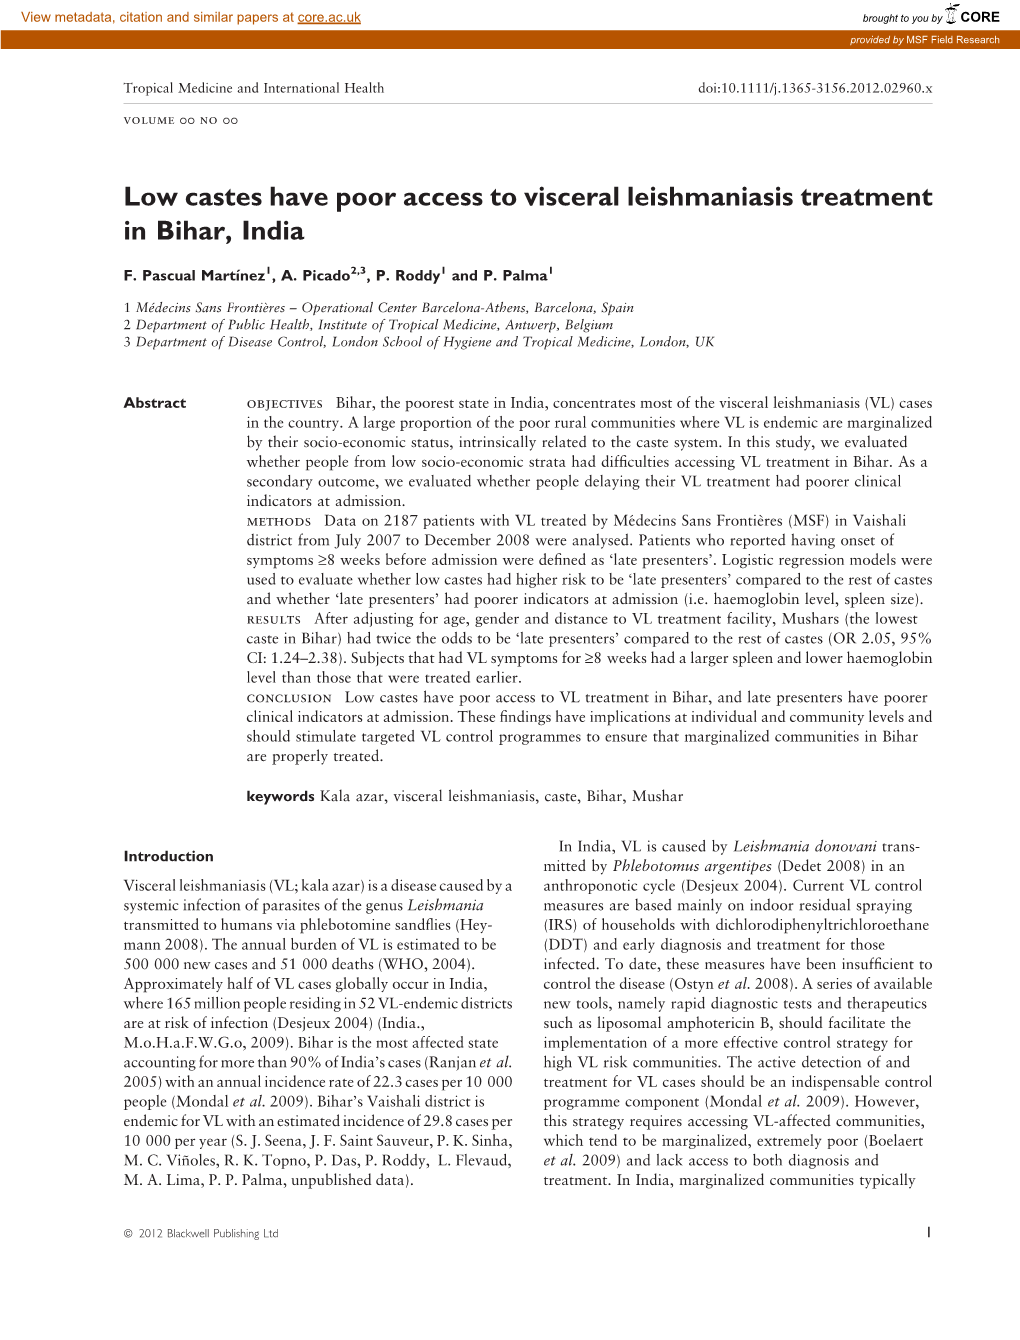 Low Castes Have Poor Access to Visceral Leishmaniasis Treatment in Bihar, India